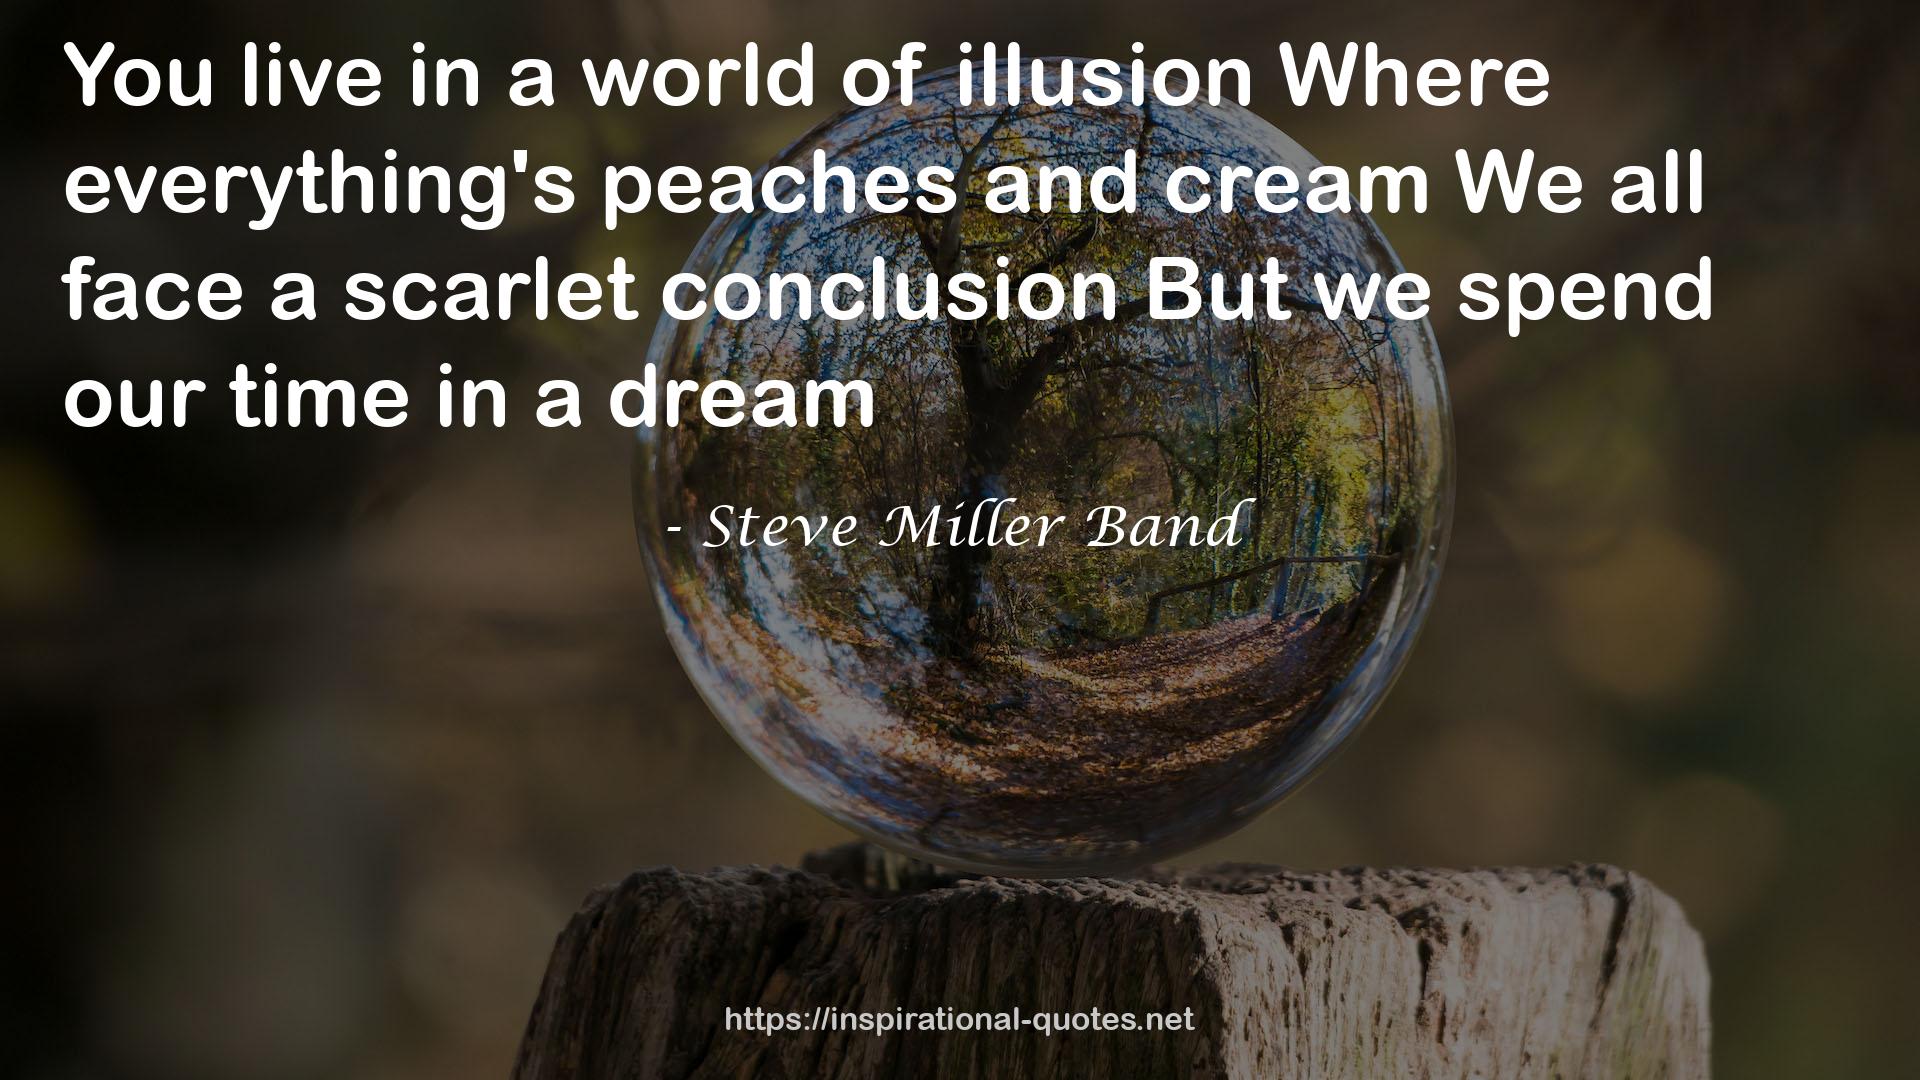 Steve Miller Band QUOTES